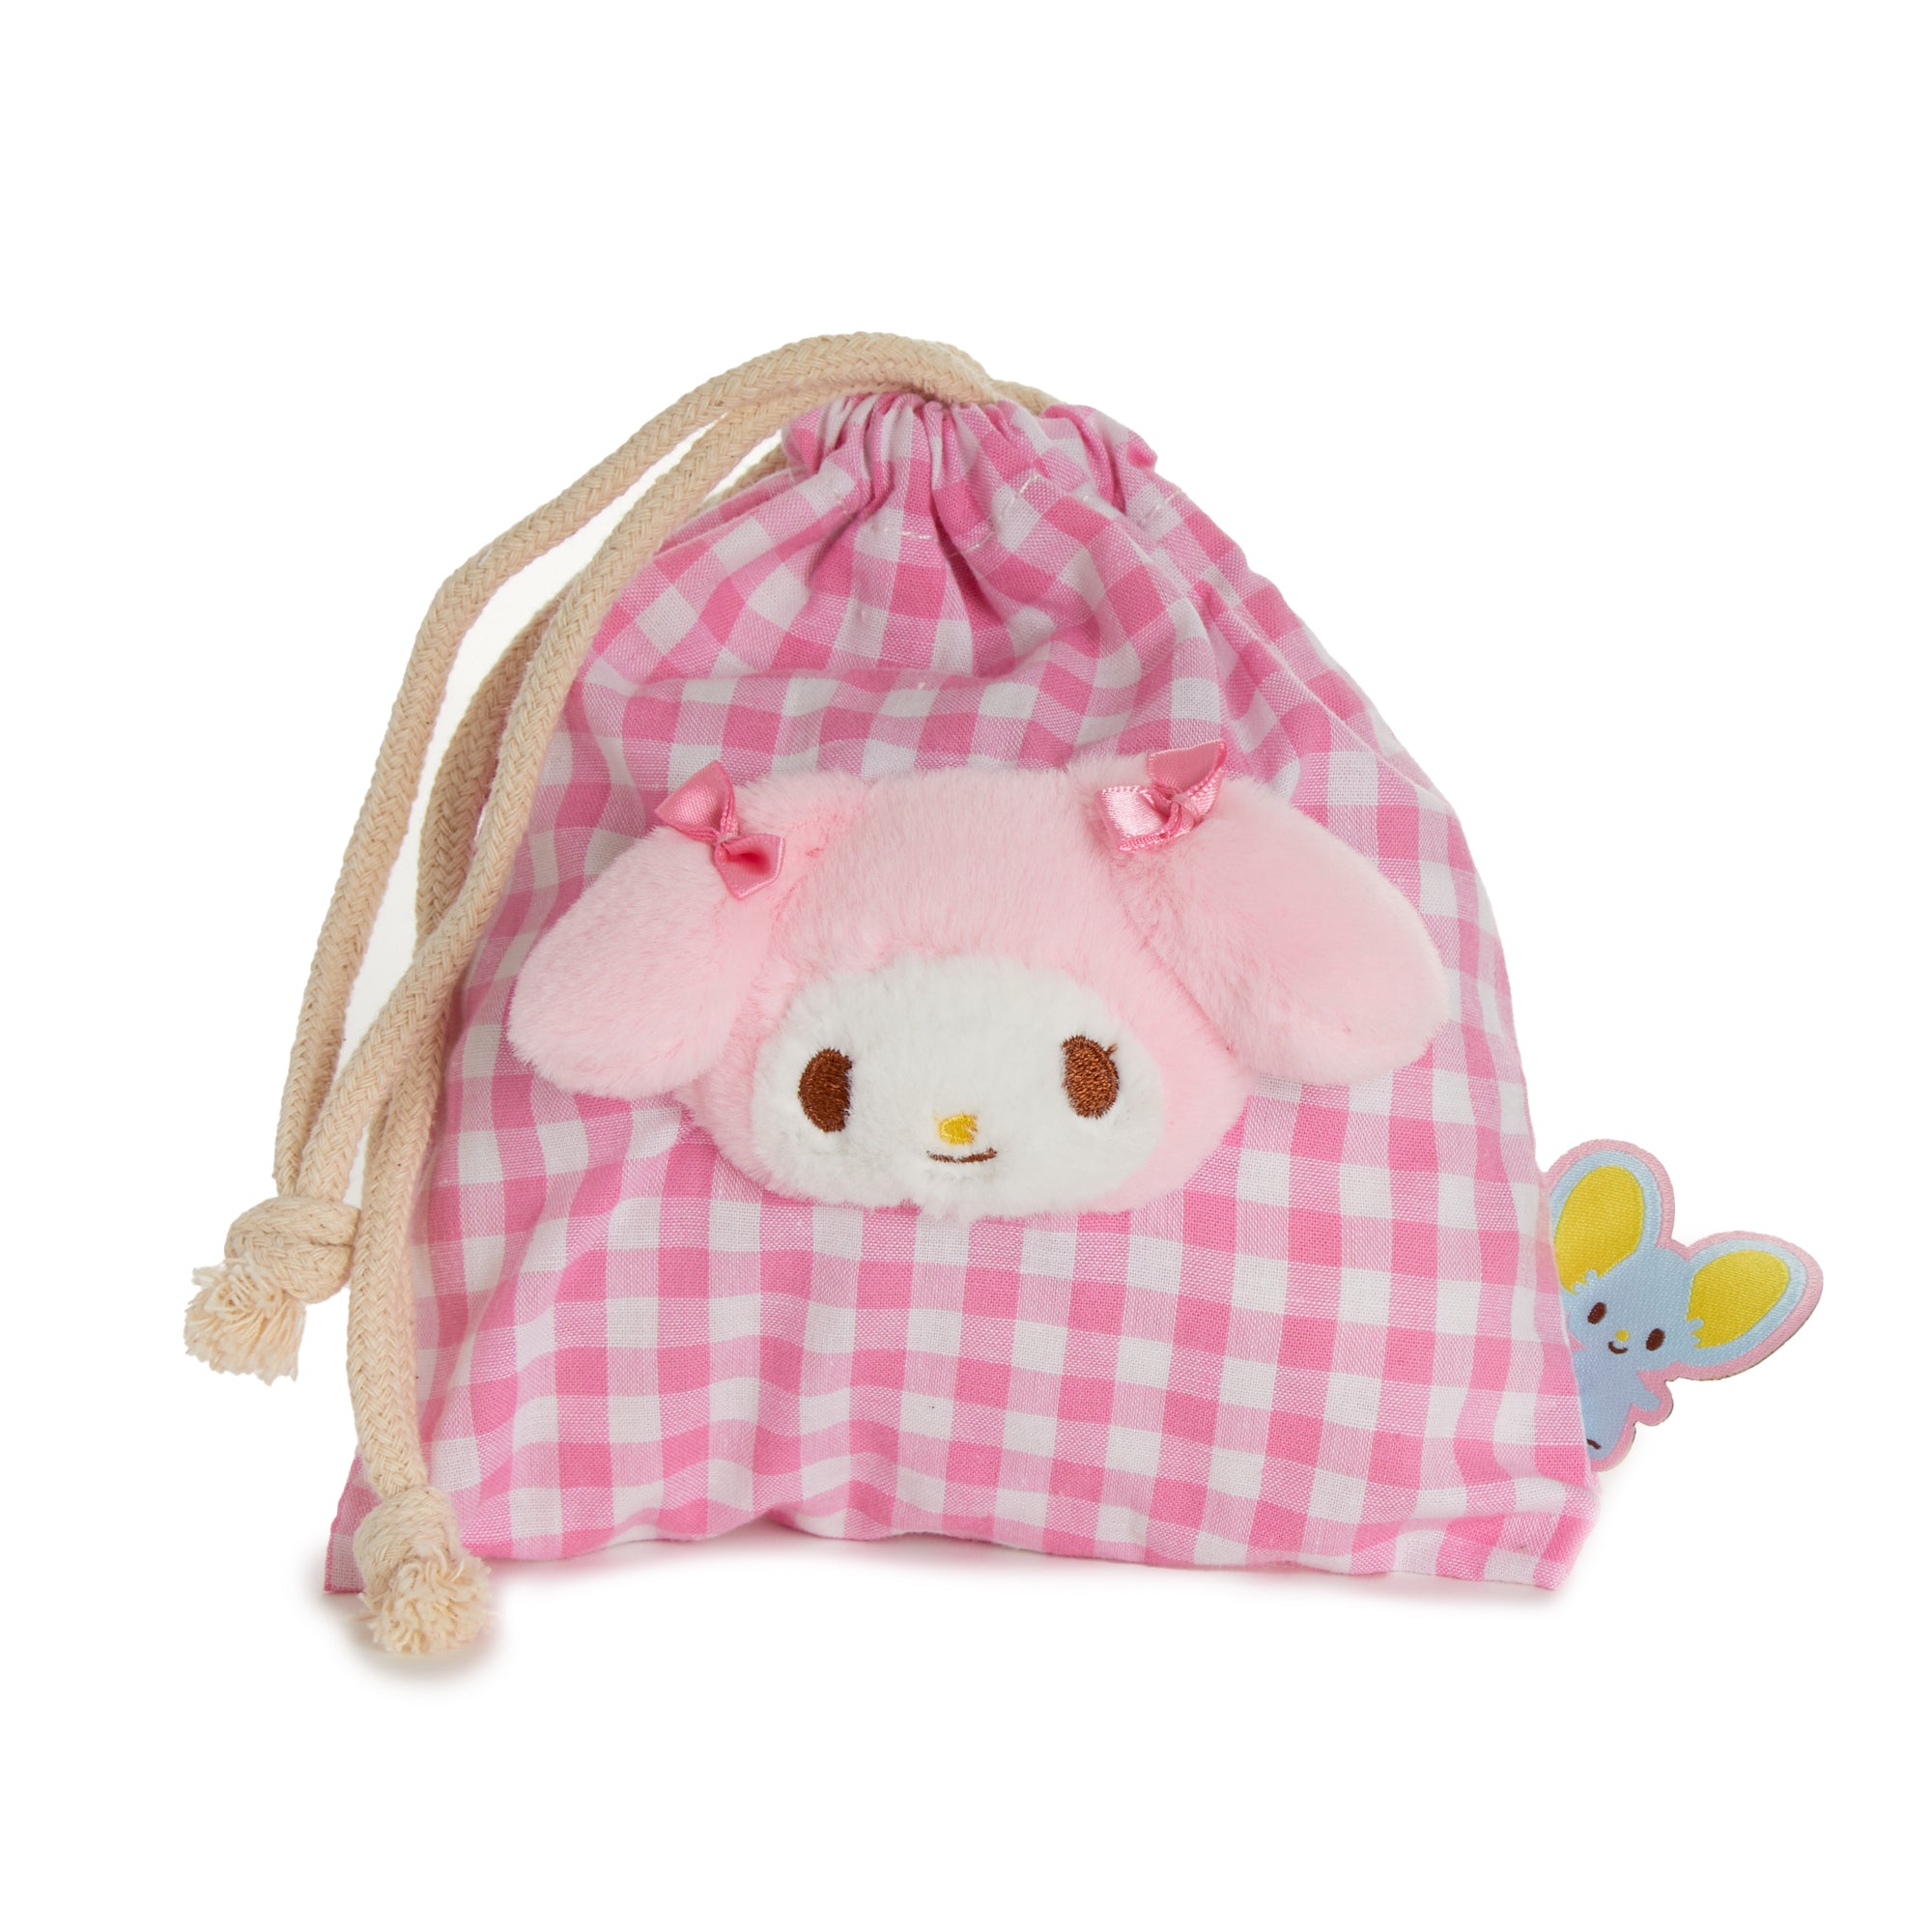 My Melody & My Sweet Piano Always Together Tote Bag – JapanLA